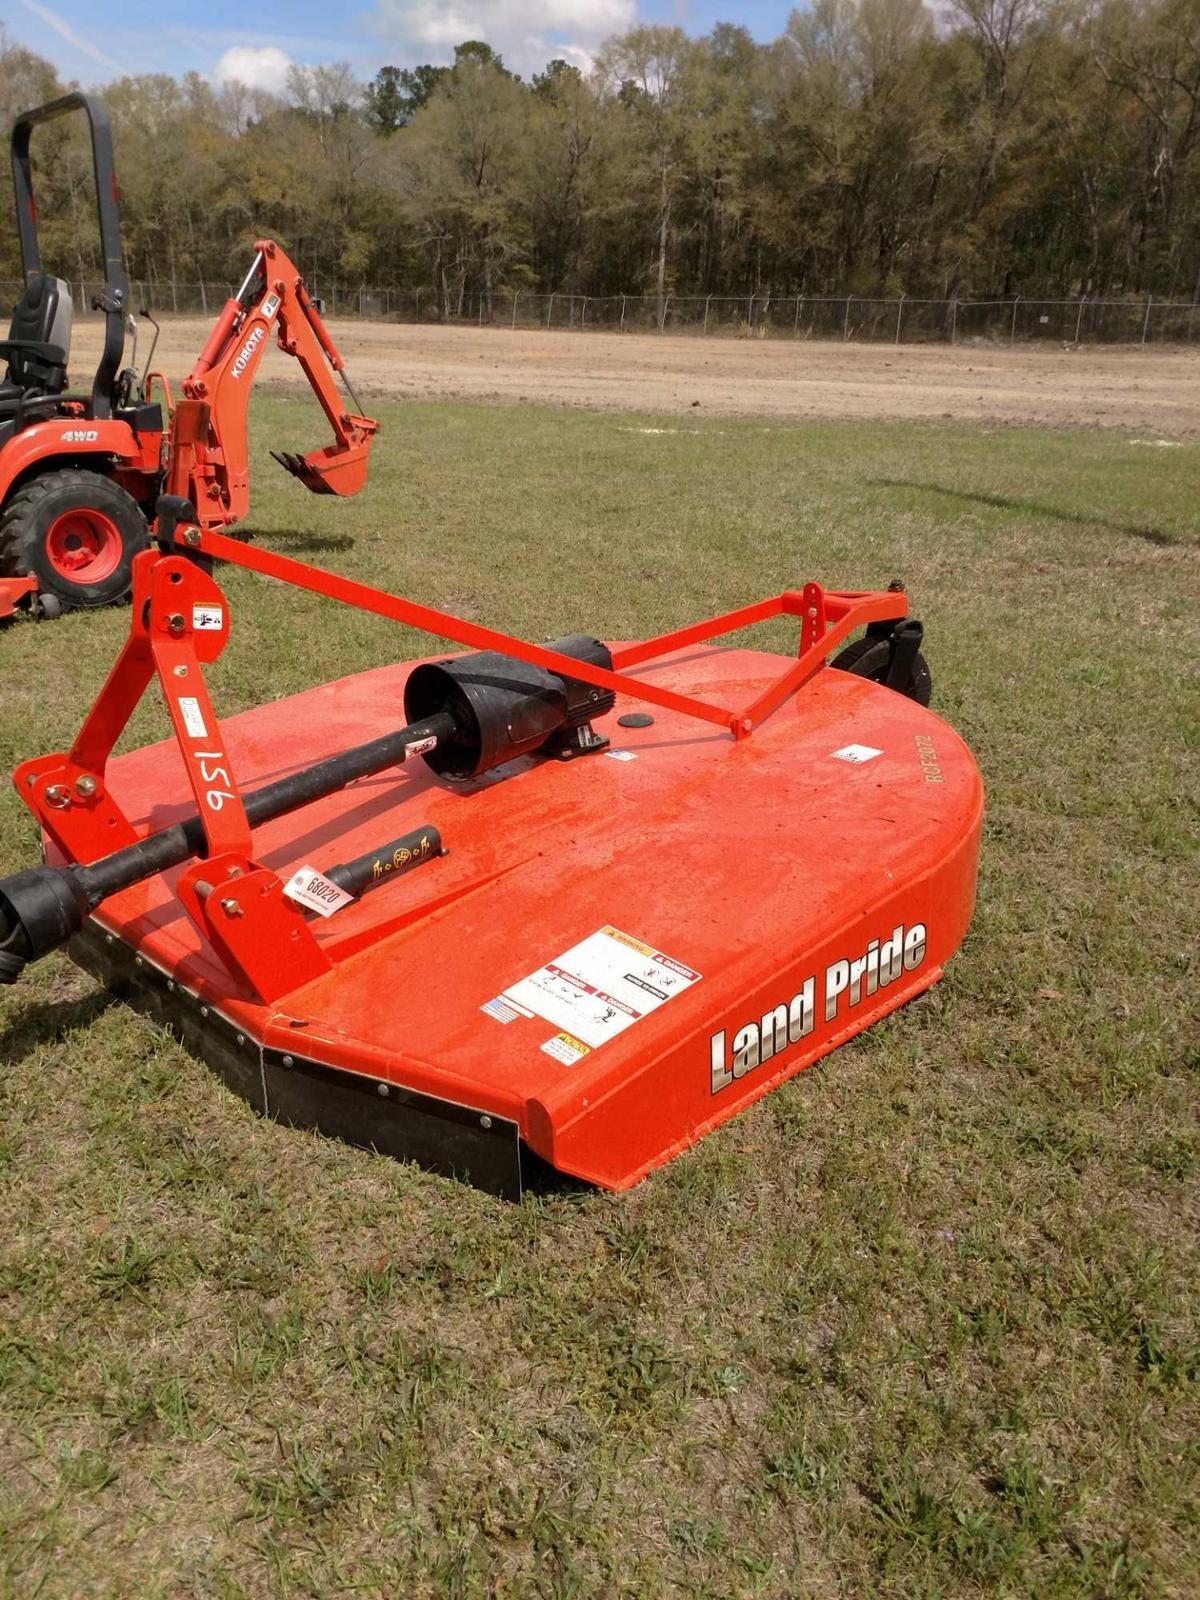 LIKE NEW LANDPRIDE RCF2072 6FT ROTARY CUTTER